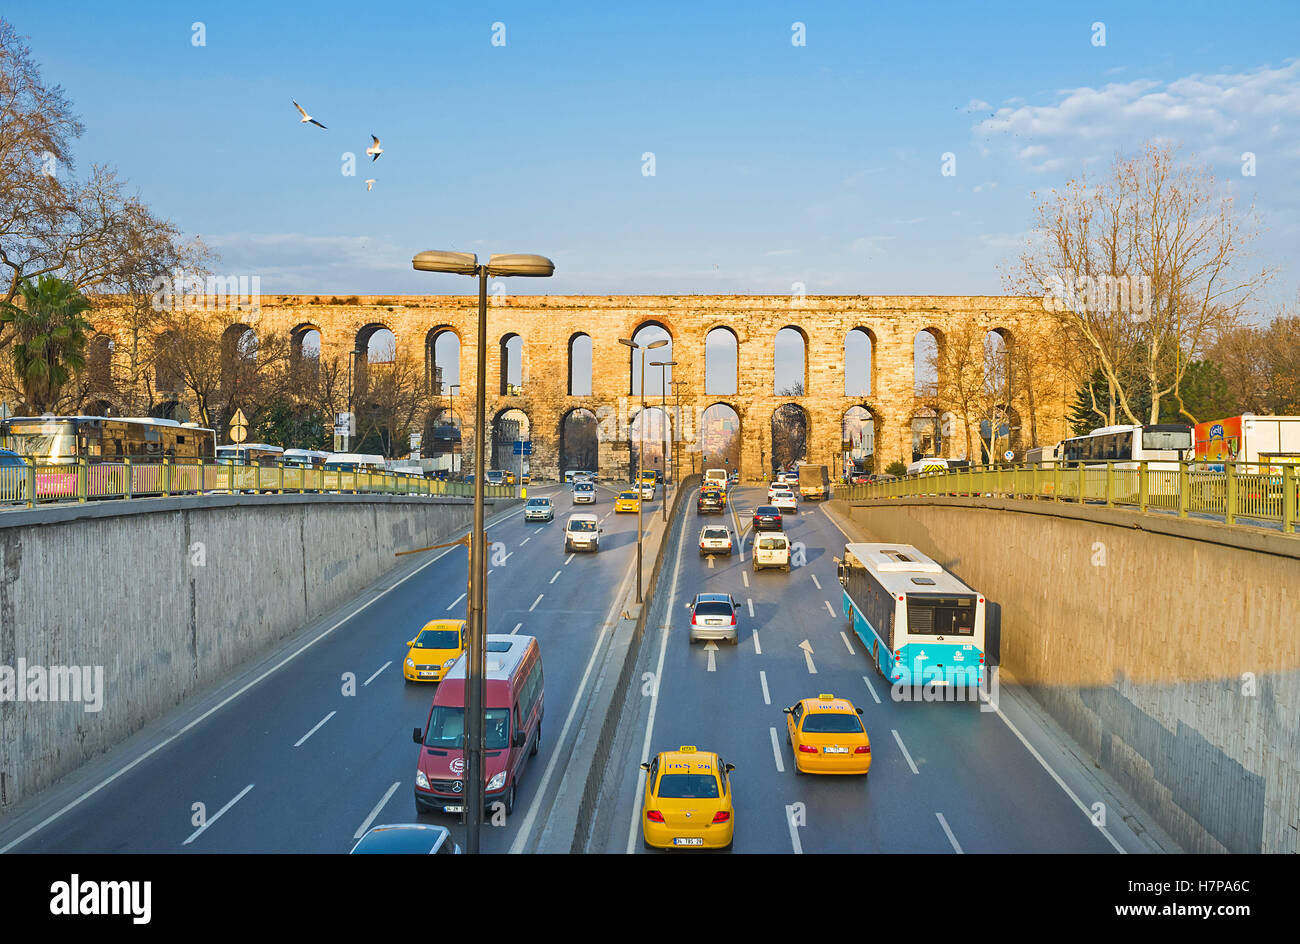 The Ataturk Boulevard passes under the arches of the ancient Valens Aqueduct Stock Photo